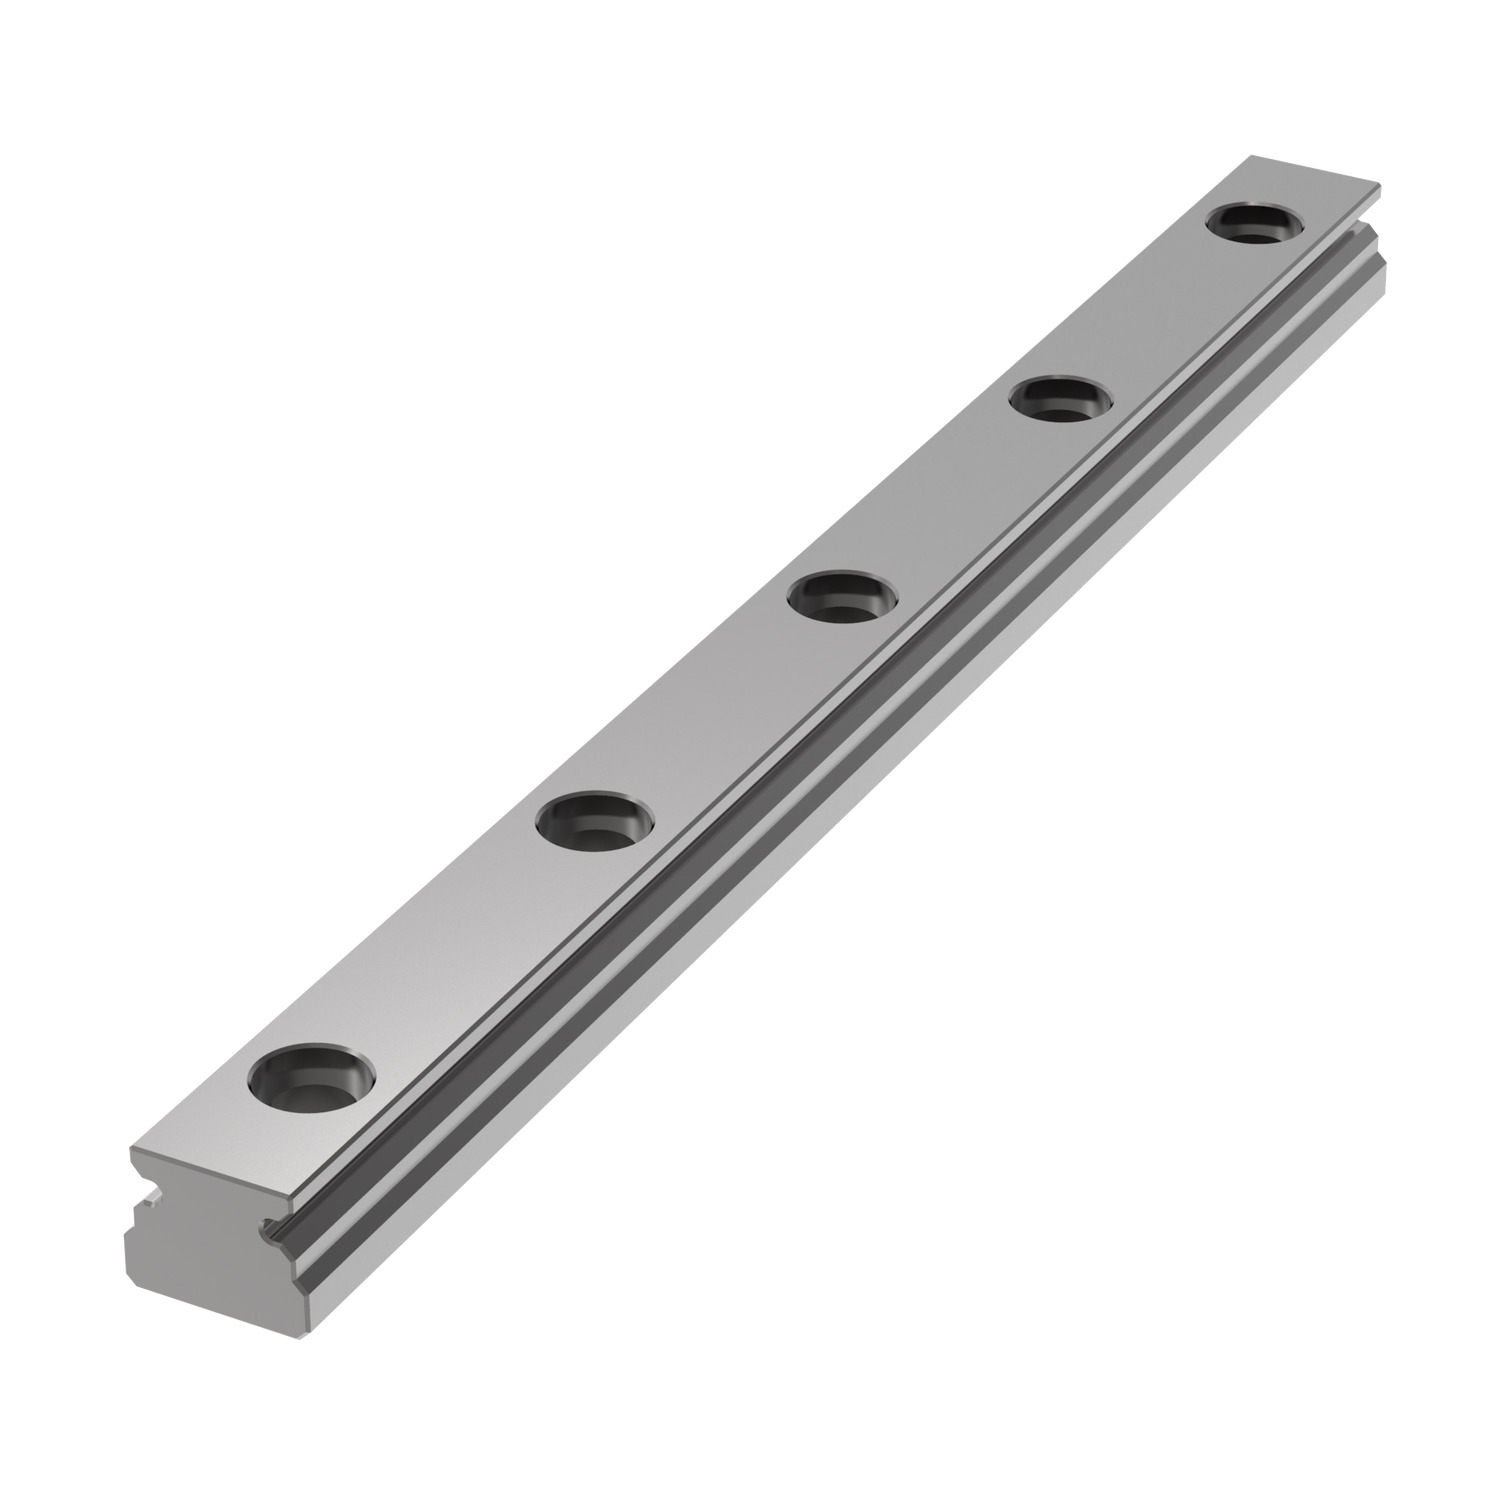 3mm Miniature Linear Rail 3mm standard width miniature linear rails. Corrosion resistant hardened stainless steel. Supplied with special low profile hex screws.